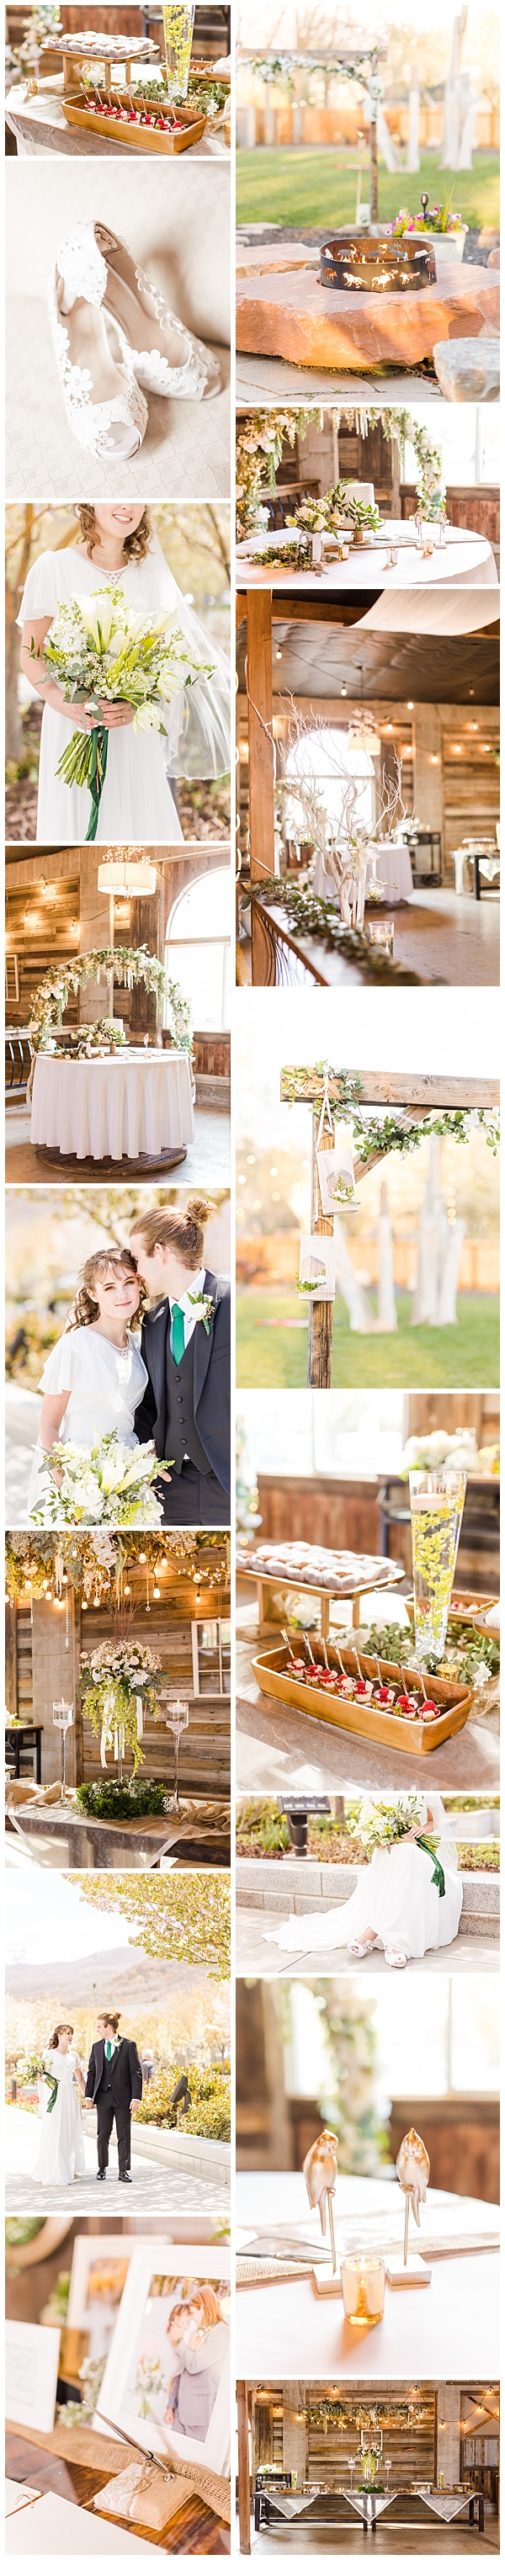 Wedding Venue in Layton Utah: Hideaway on Angel. Beautiful rustic barn with a cozy interior and spacious backyard where guests can enjoy a fire and yard games